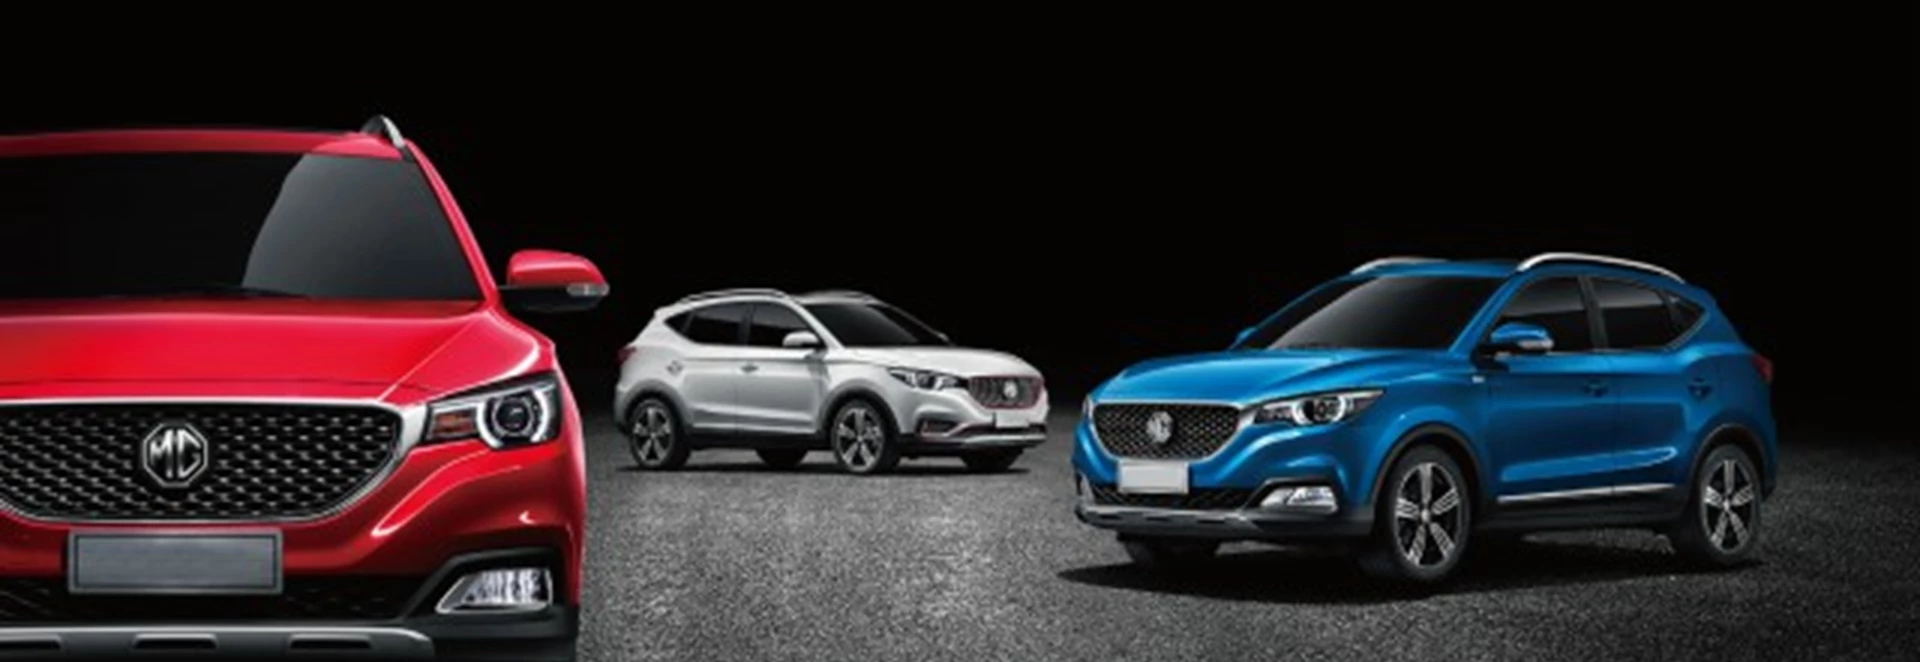 MG reveals its new XS mini-SUV to rival the Captur